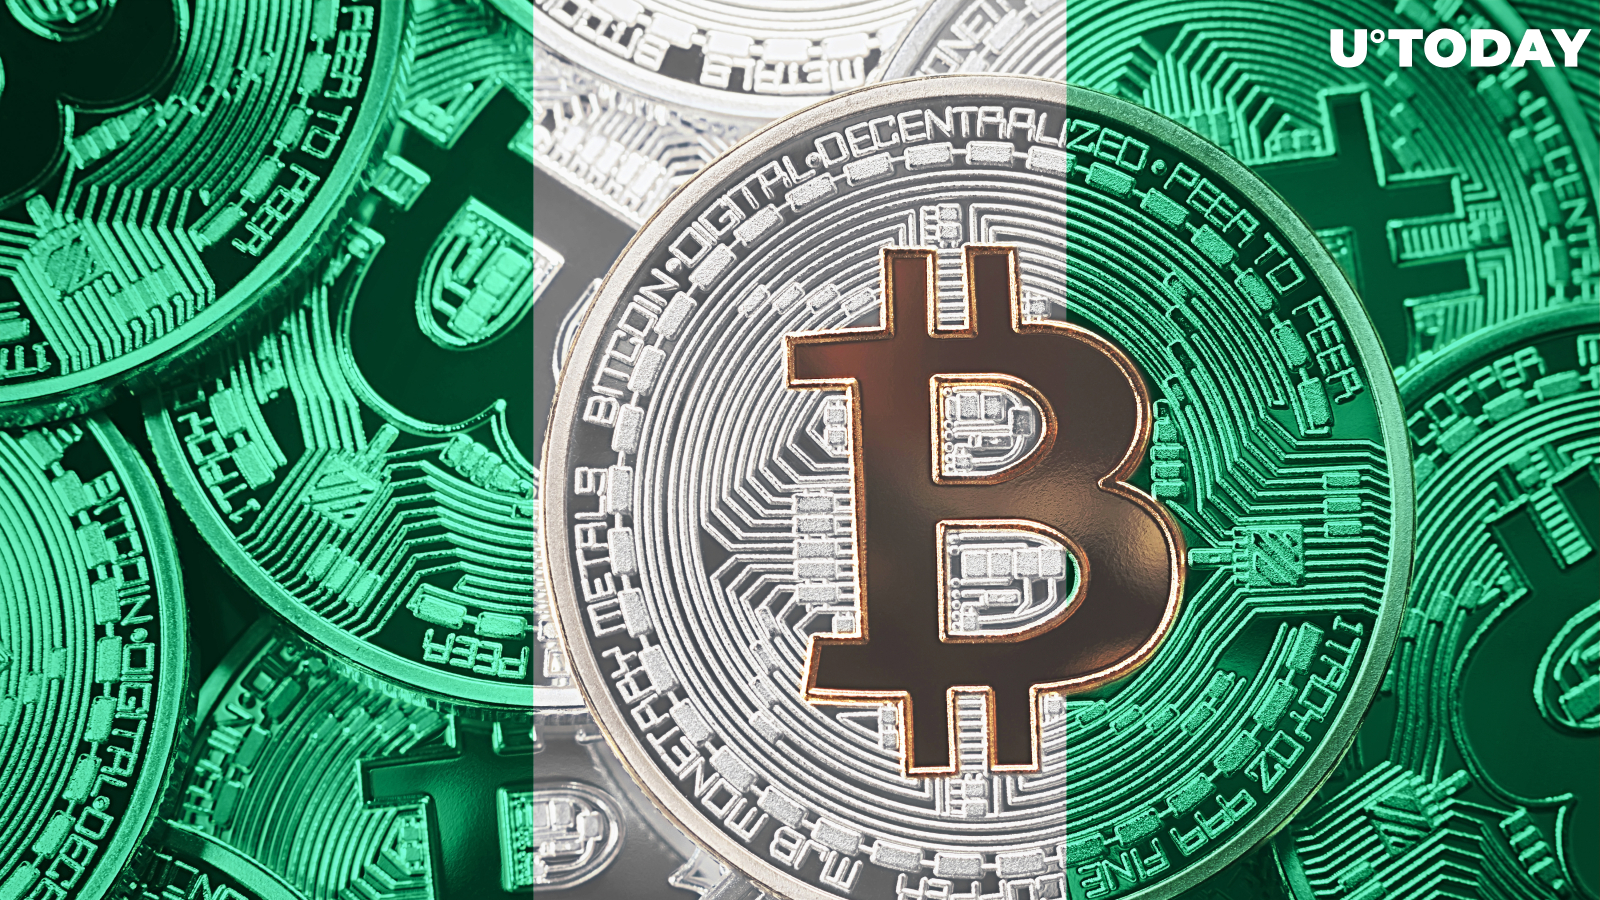 Nigeria's Central Bank Bans Bitcoin and Other Cryptocurrencies